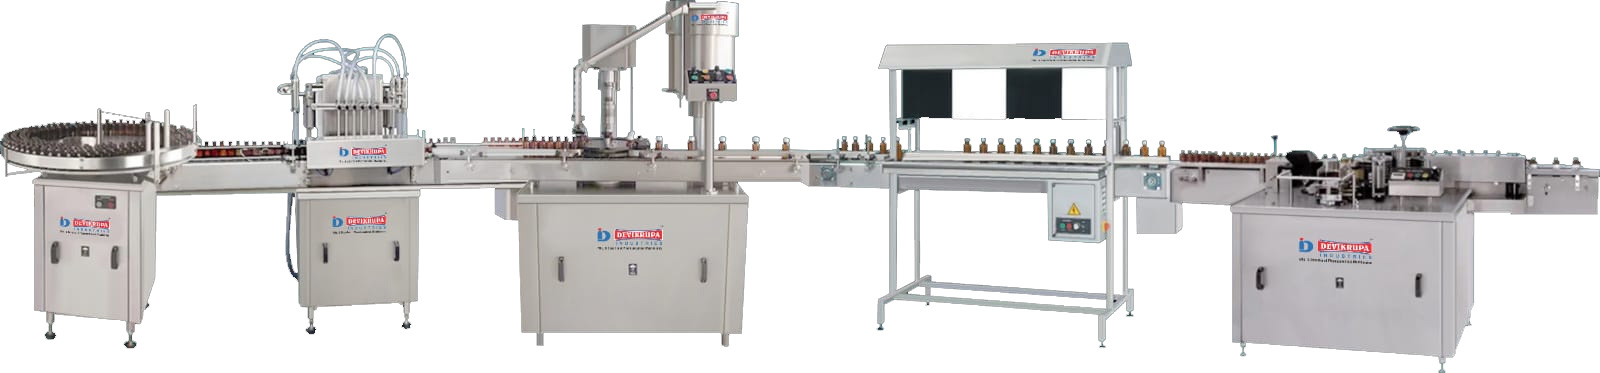 High Speed Automatic Label Code Printing Machine